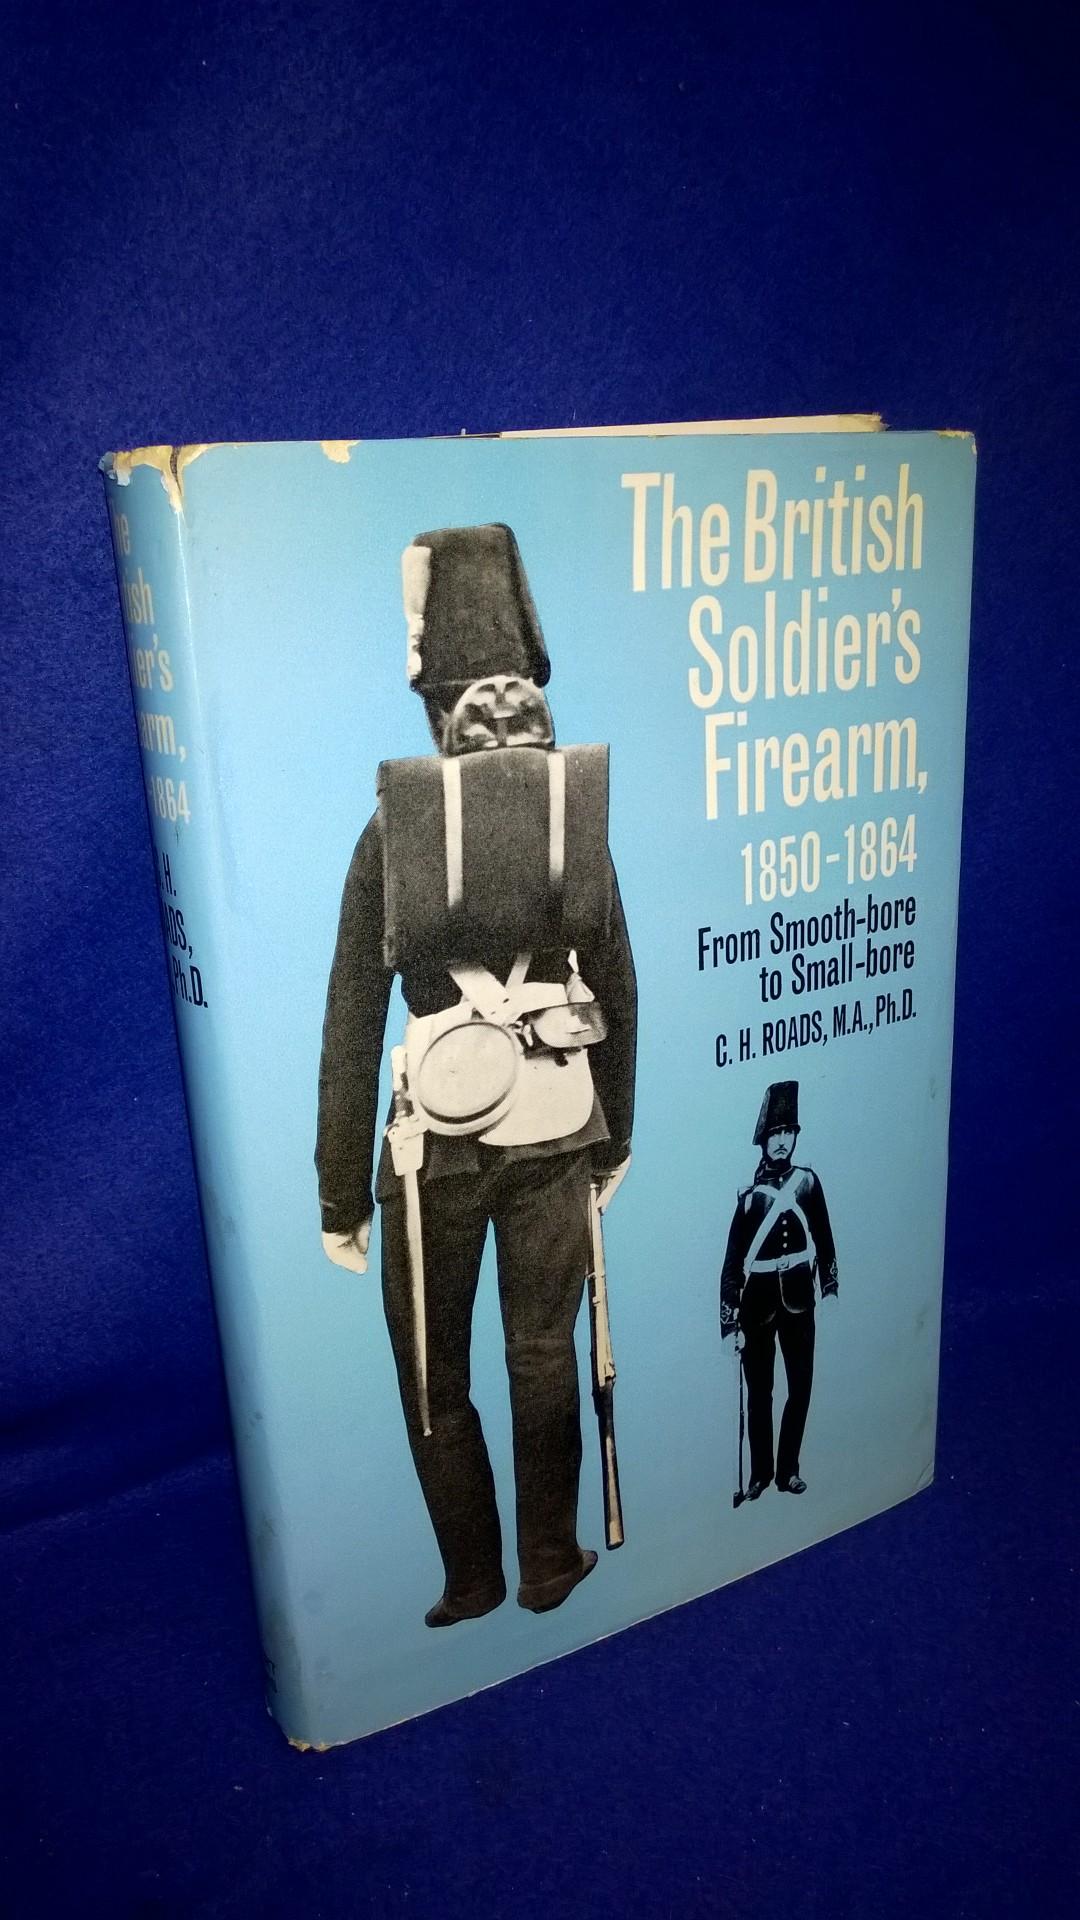 The British Soldier's Firearm 1850-1864: From Smooth-bore to Small-bore.